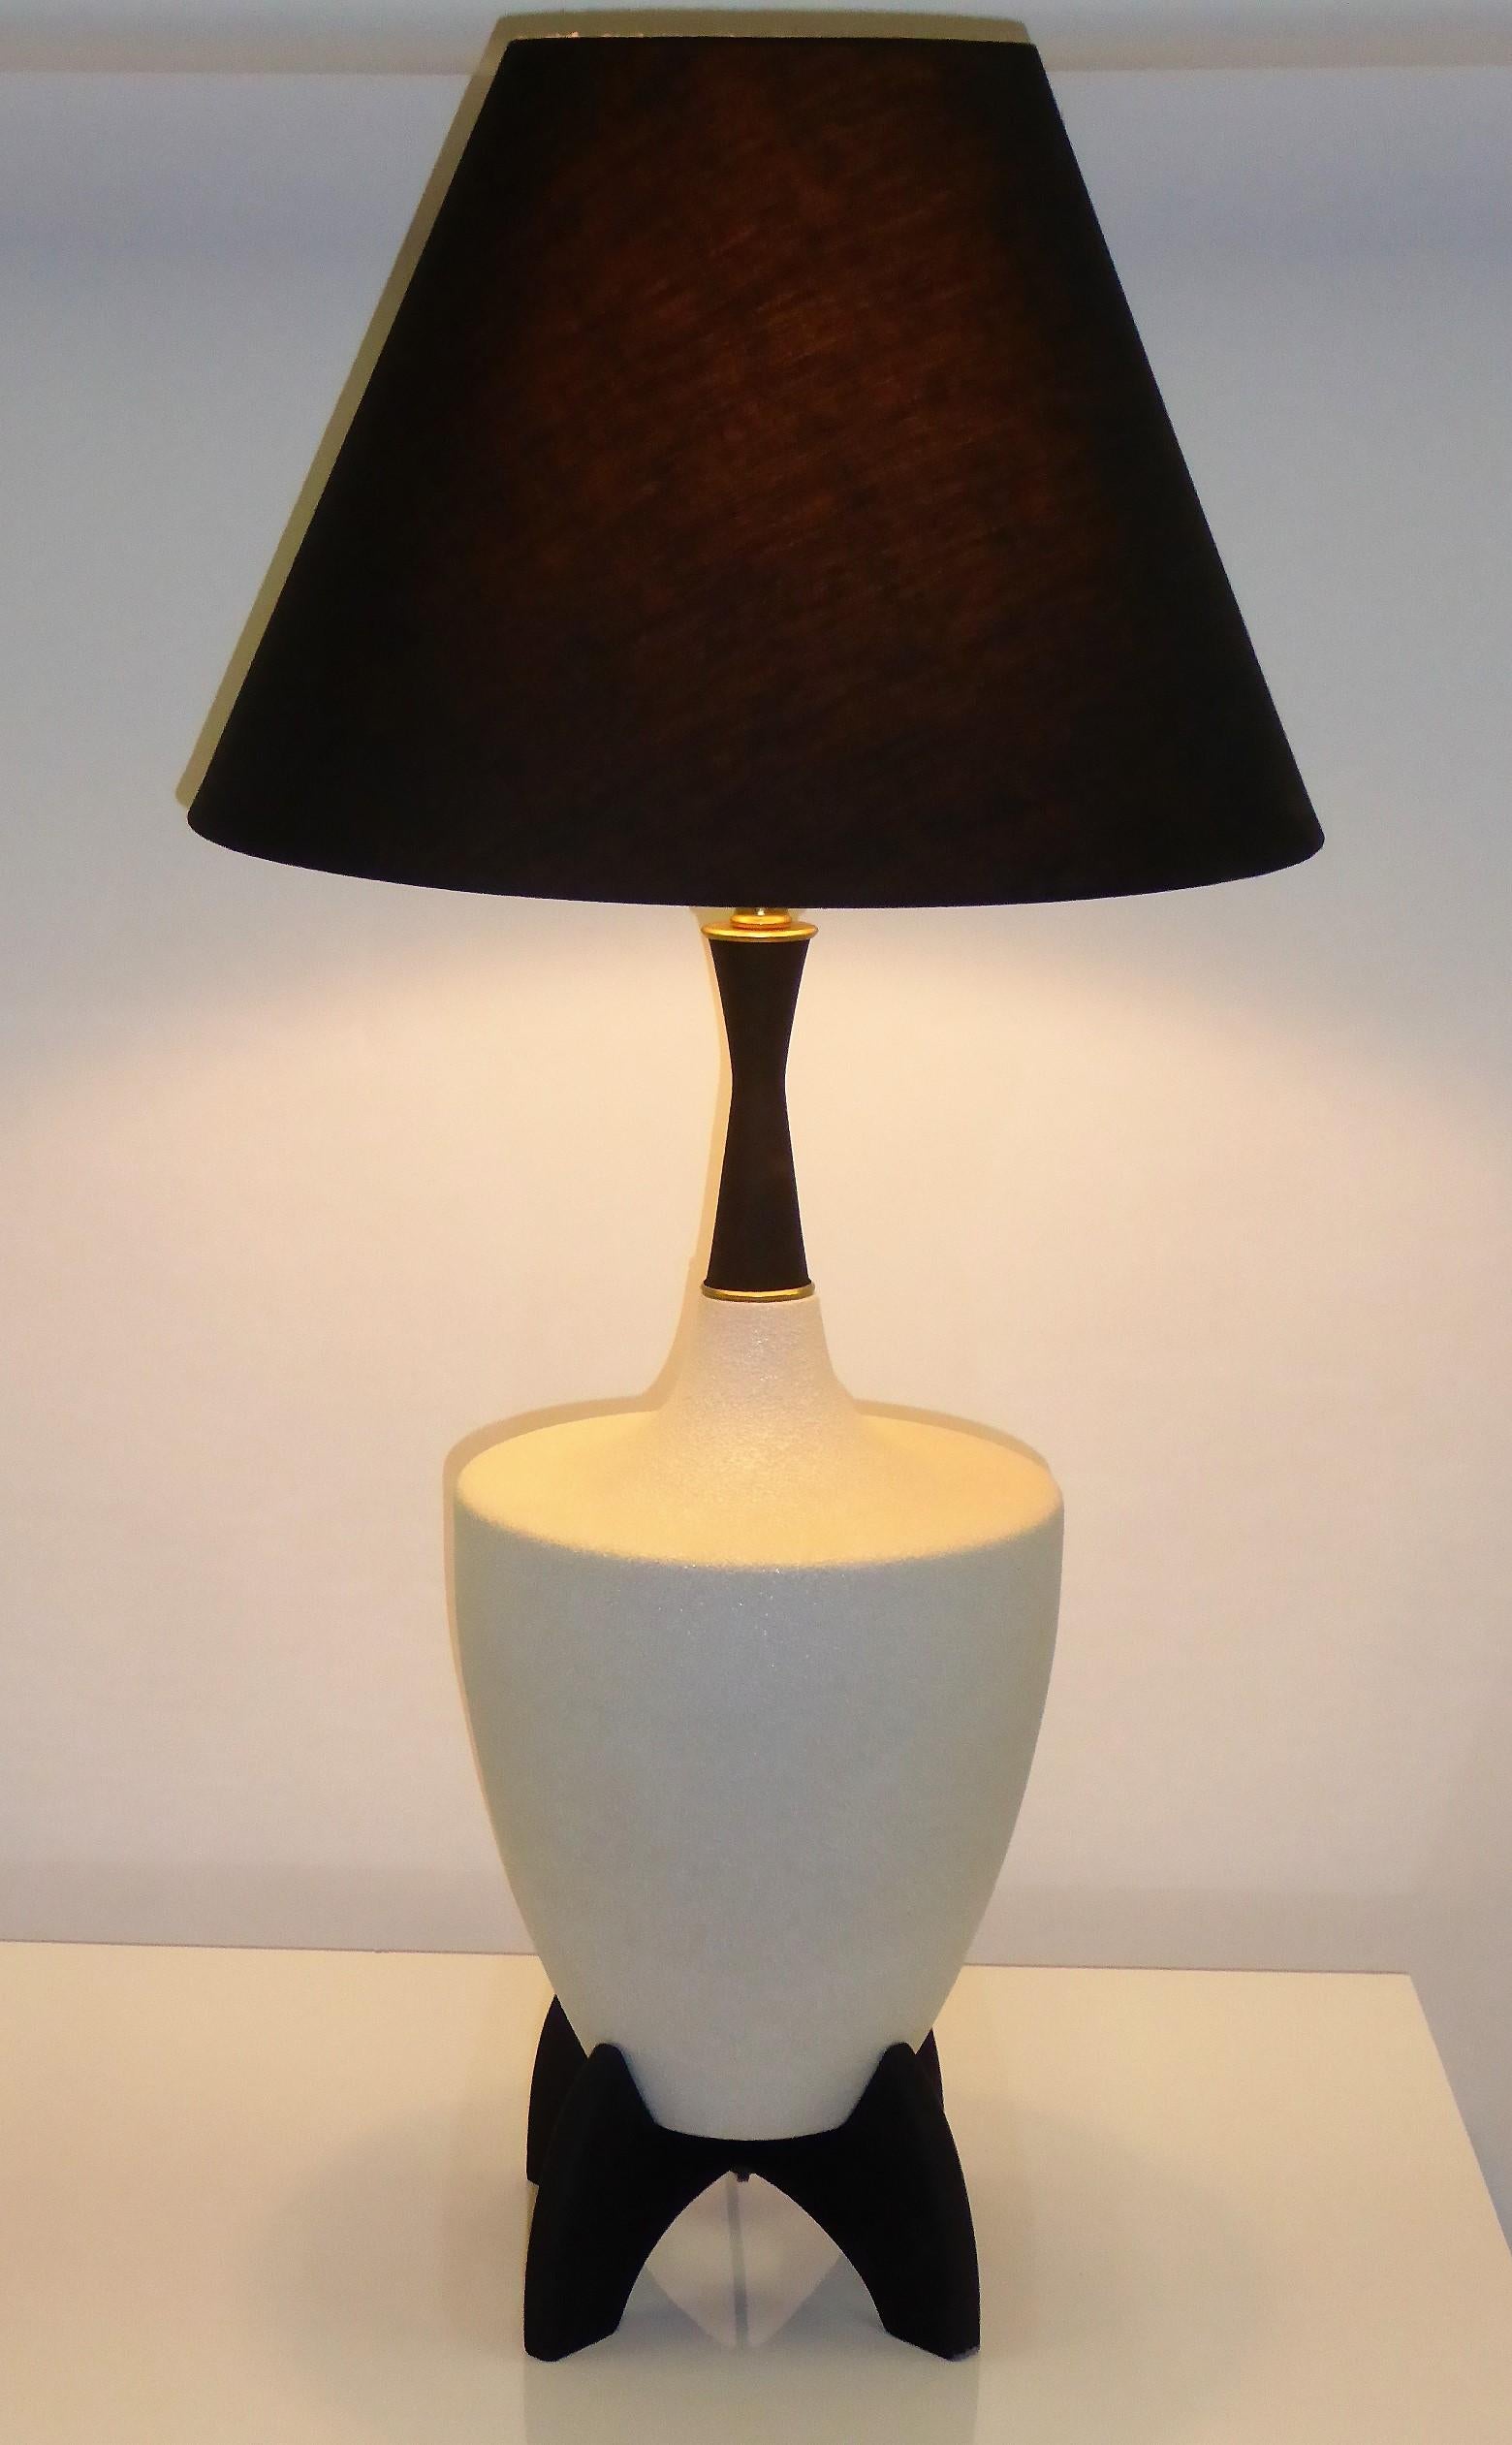 Pair of Modern Urn Shape Ceramic Table Lamps with Black Wood Stand and Neck 2